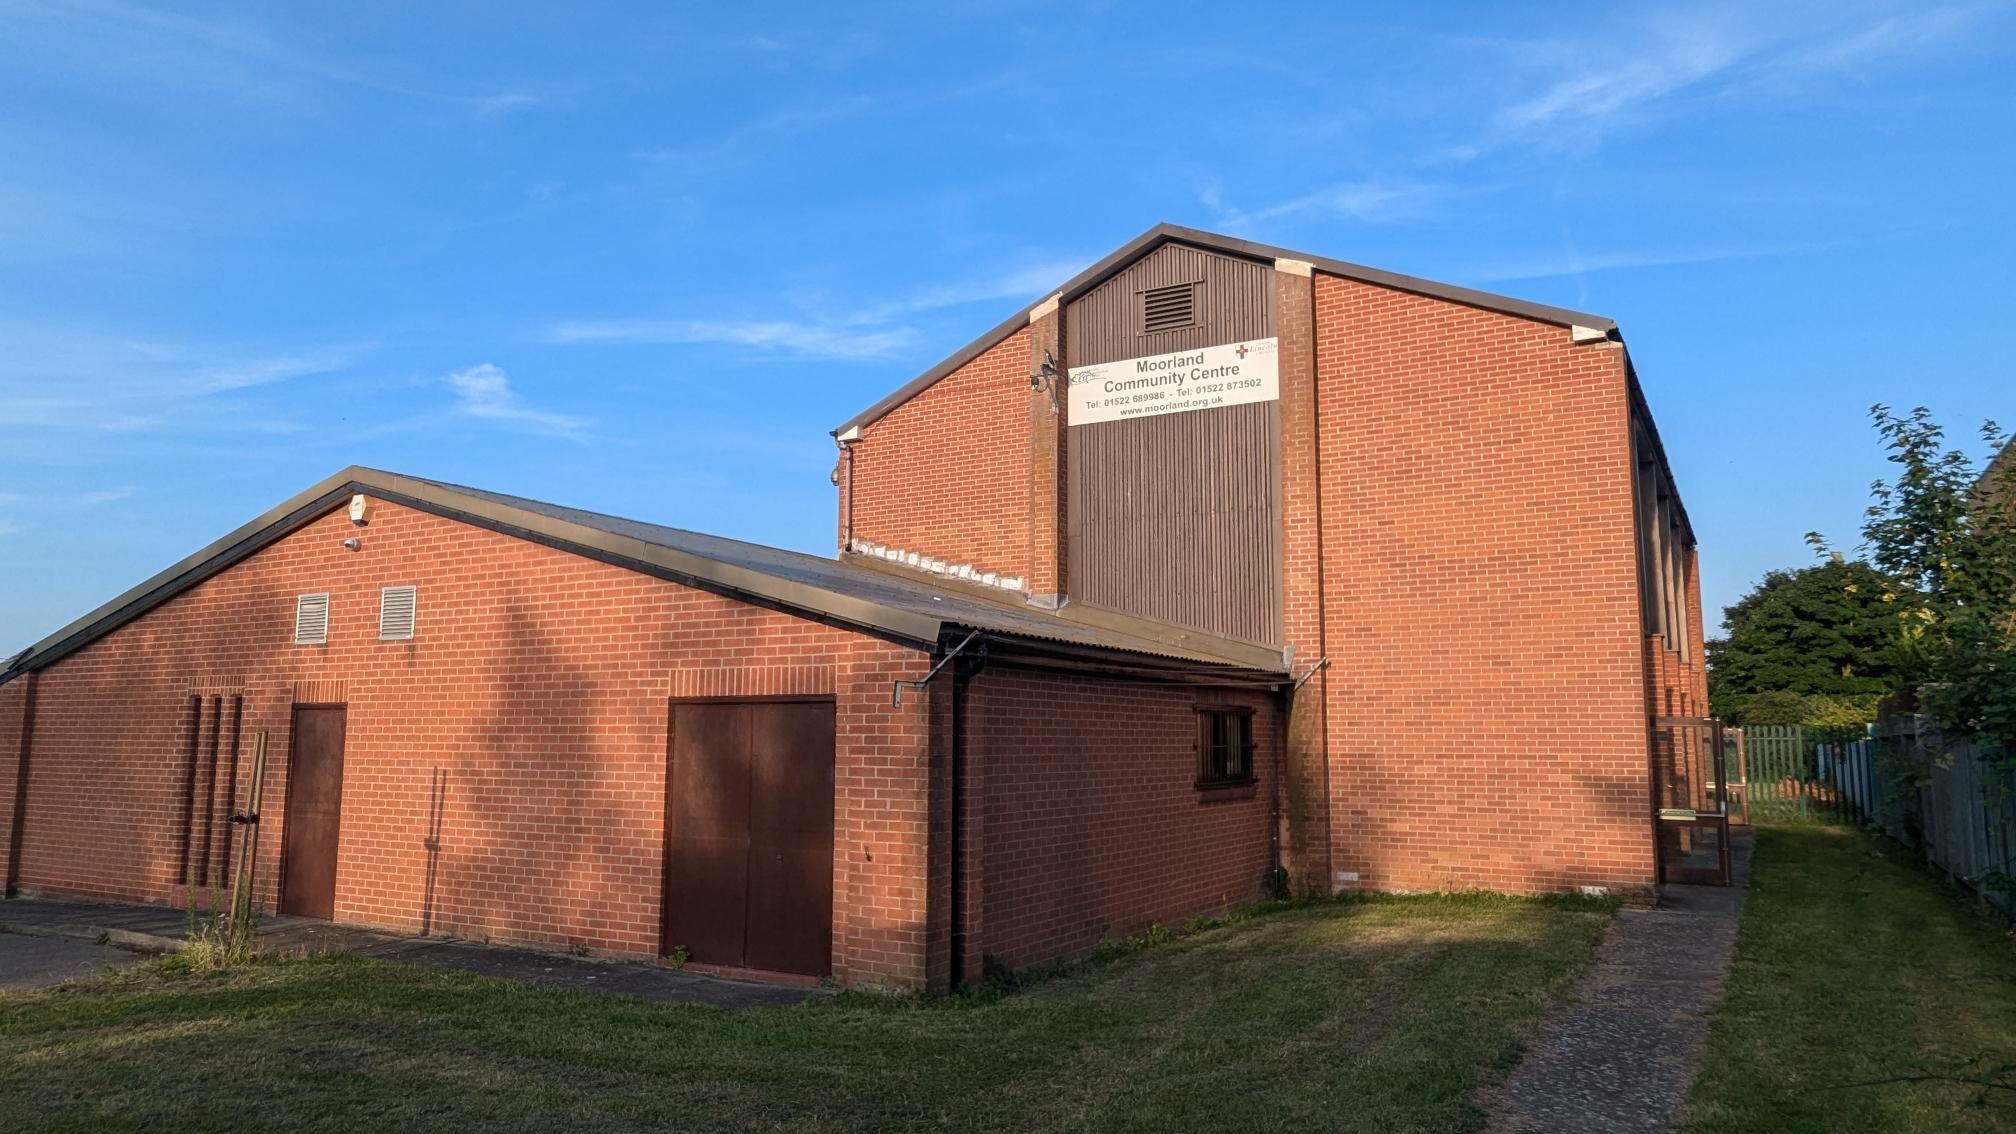 Capital improvements to Moorland Community Centre are due to be completed this summer.